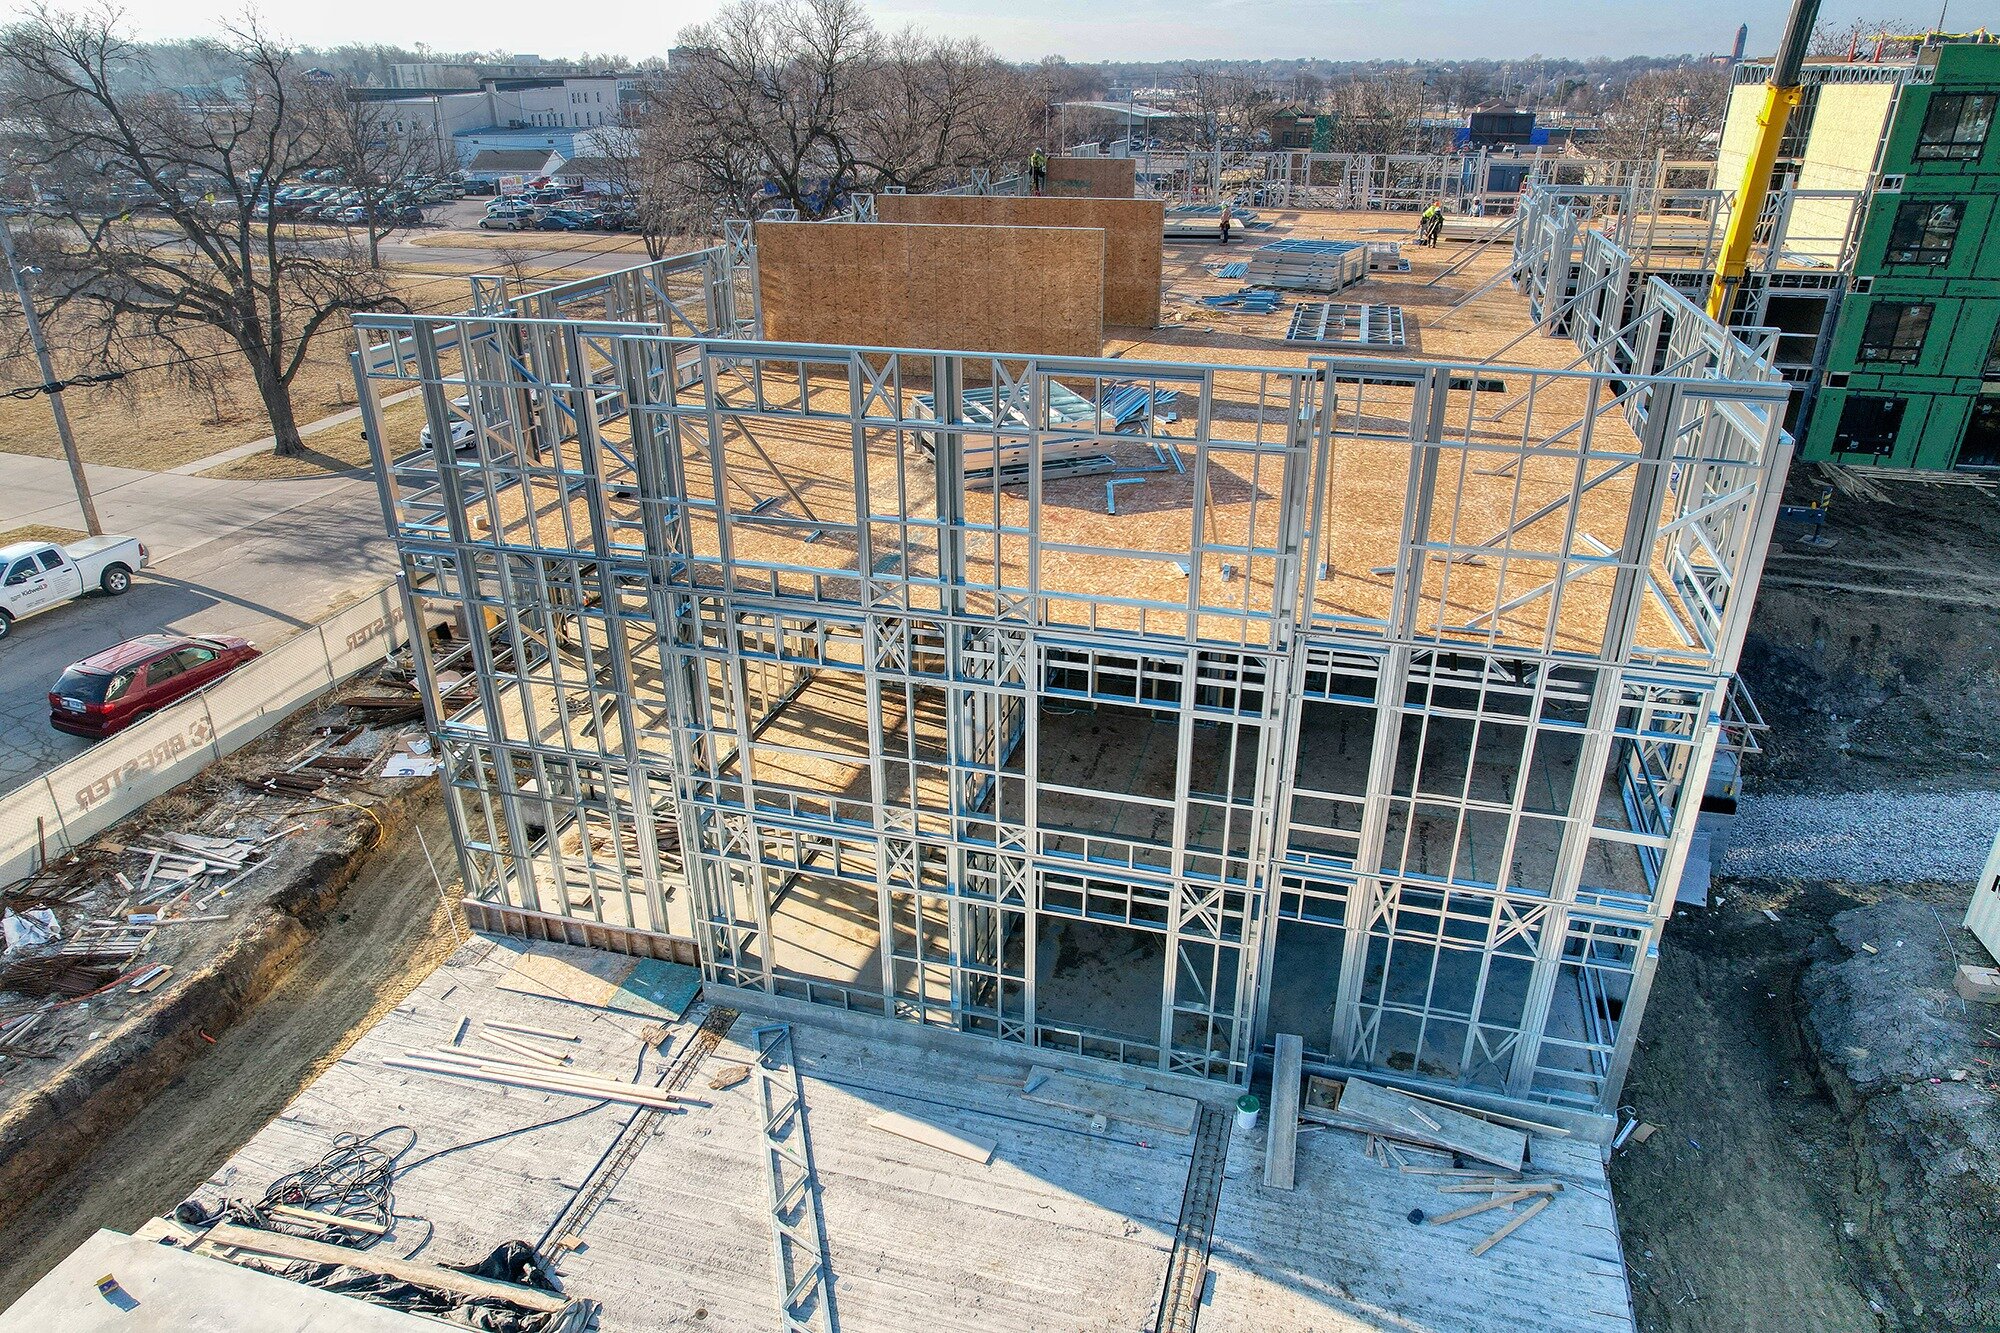 This is our Antelope Apartment project in Lincoln, Nebraska, where we are demonstrating how the construction industry is light-gauge steel (LGS).

Foundry Fabrication &amp; Supply specialize in custom prefab walls, floor systems, and roofing systems 